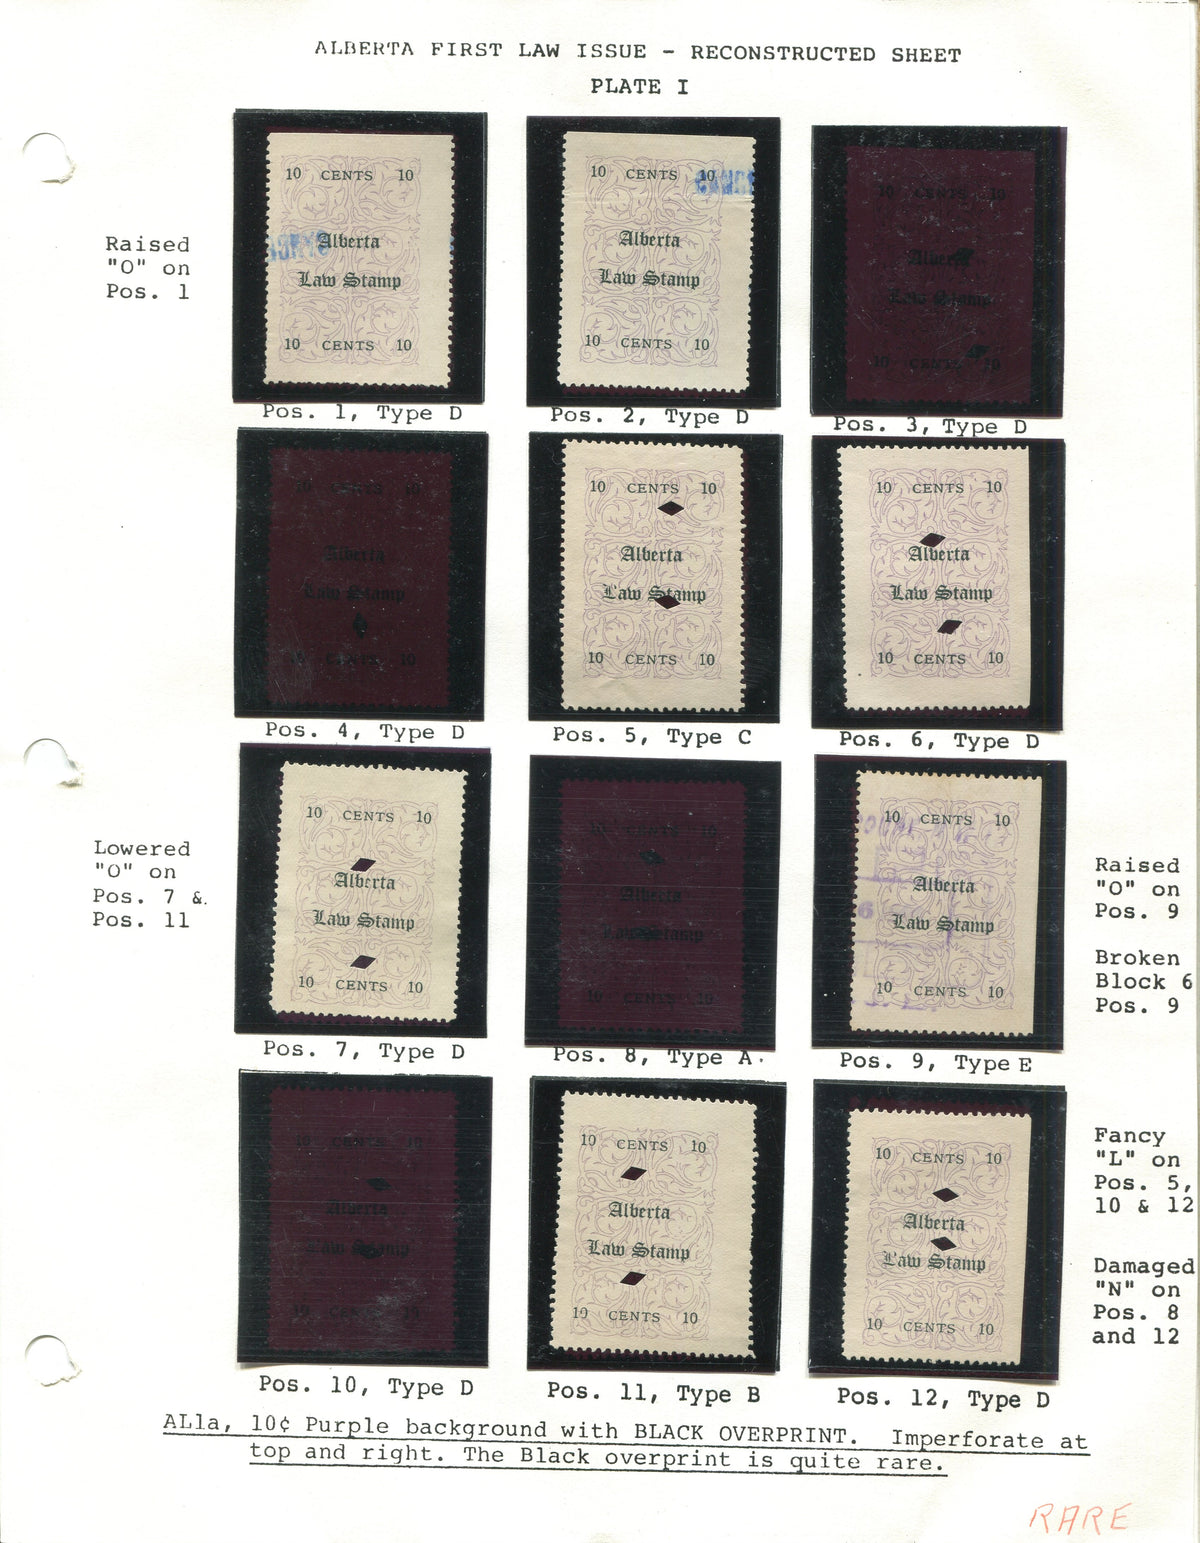 0001AL2010 - AL1(b) - Used Partially Reconstructed Sheet, UNLISTED